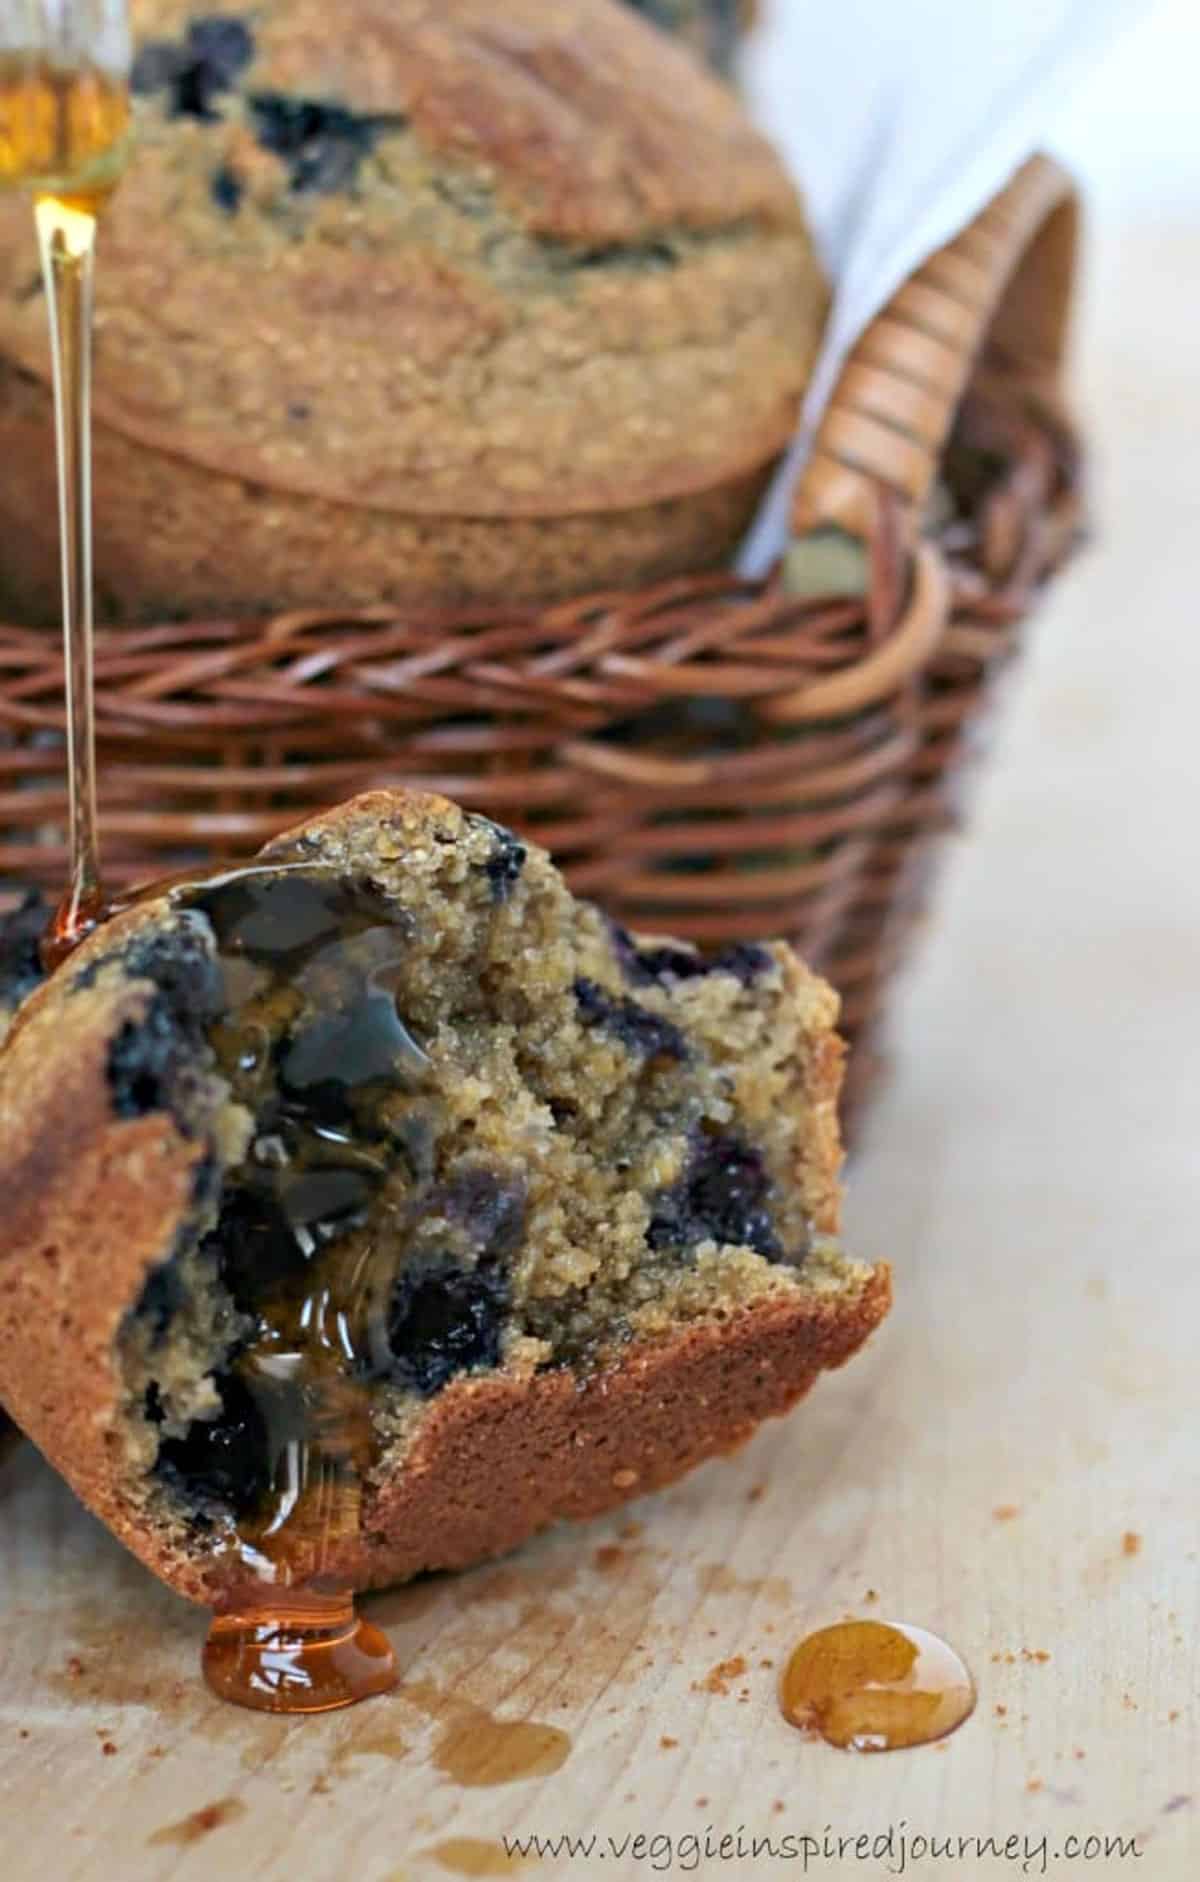 Maple syrup being drizzle over a halved blueberry muffin.